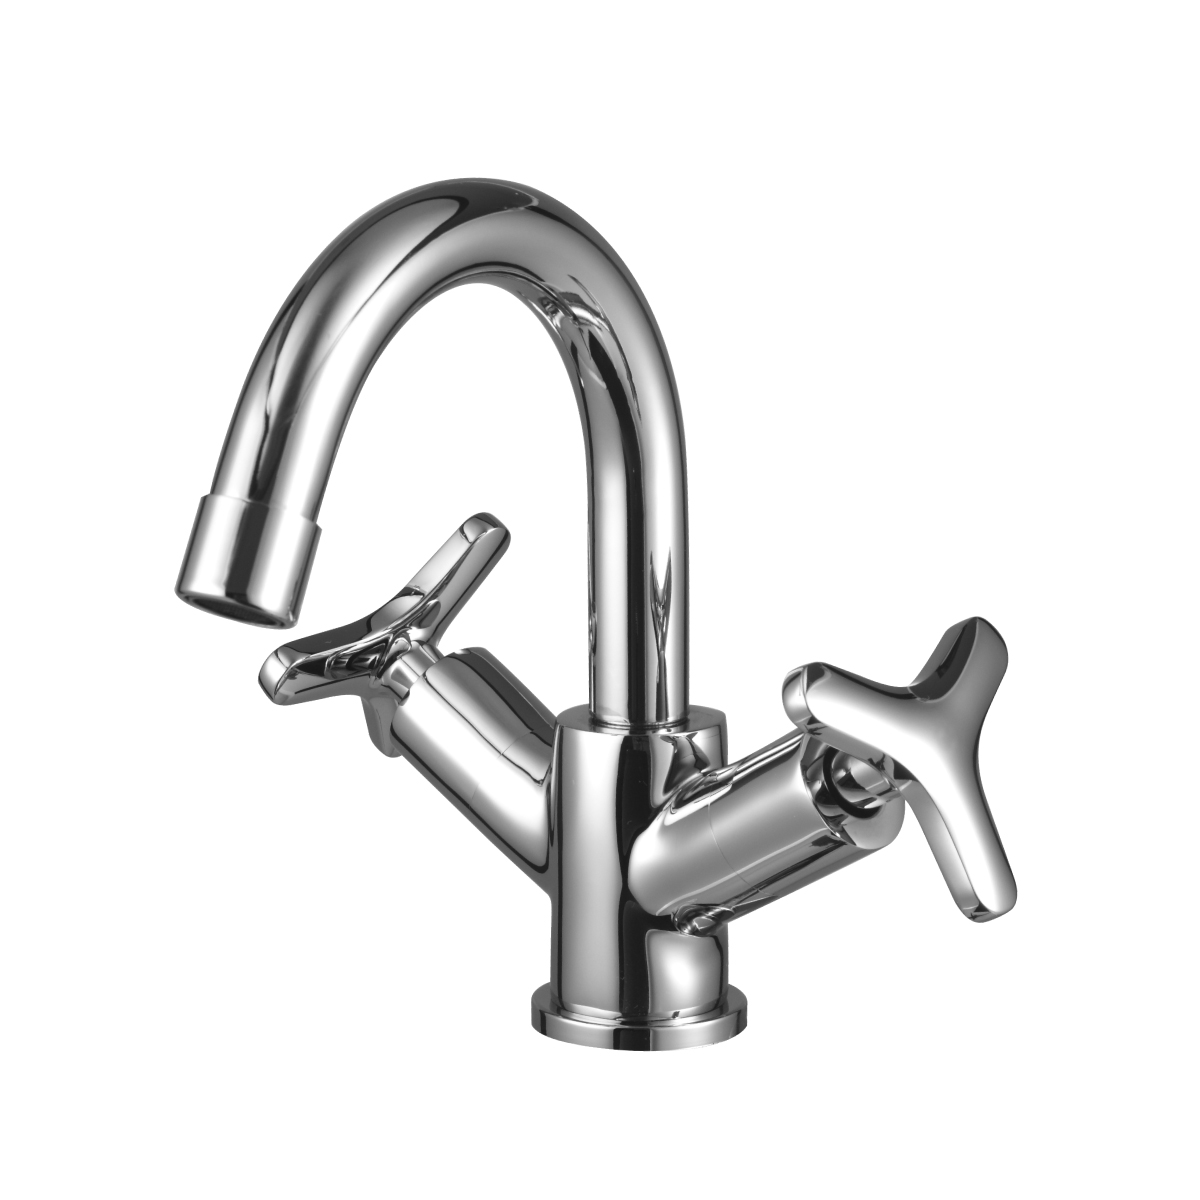 LM1907C Washbasin faucet
with swivel spout